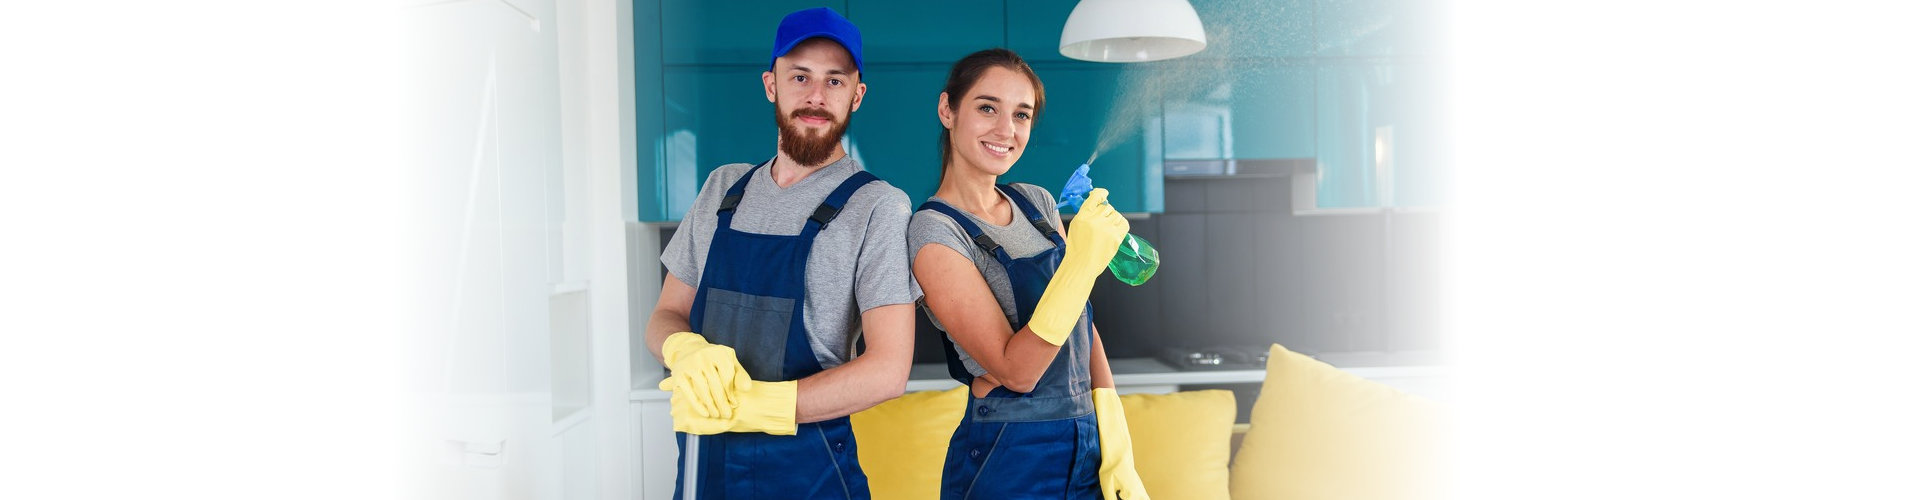 two cleaners holding their respective cleaning equipment